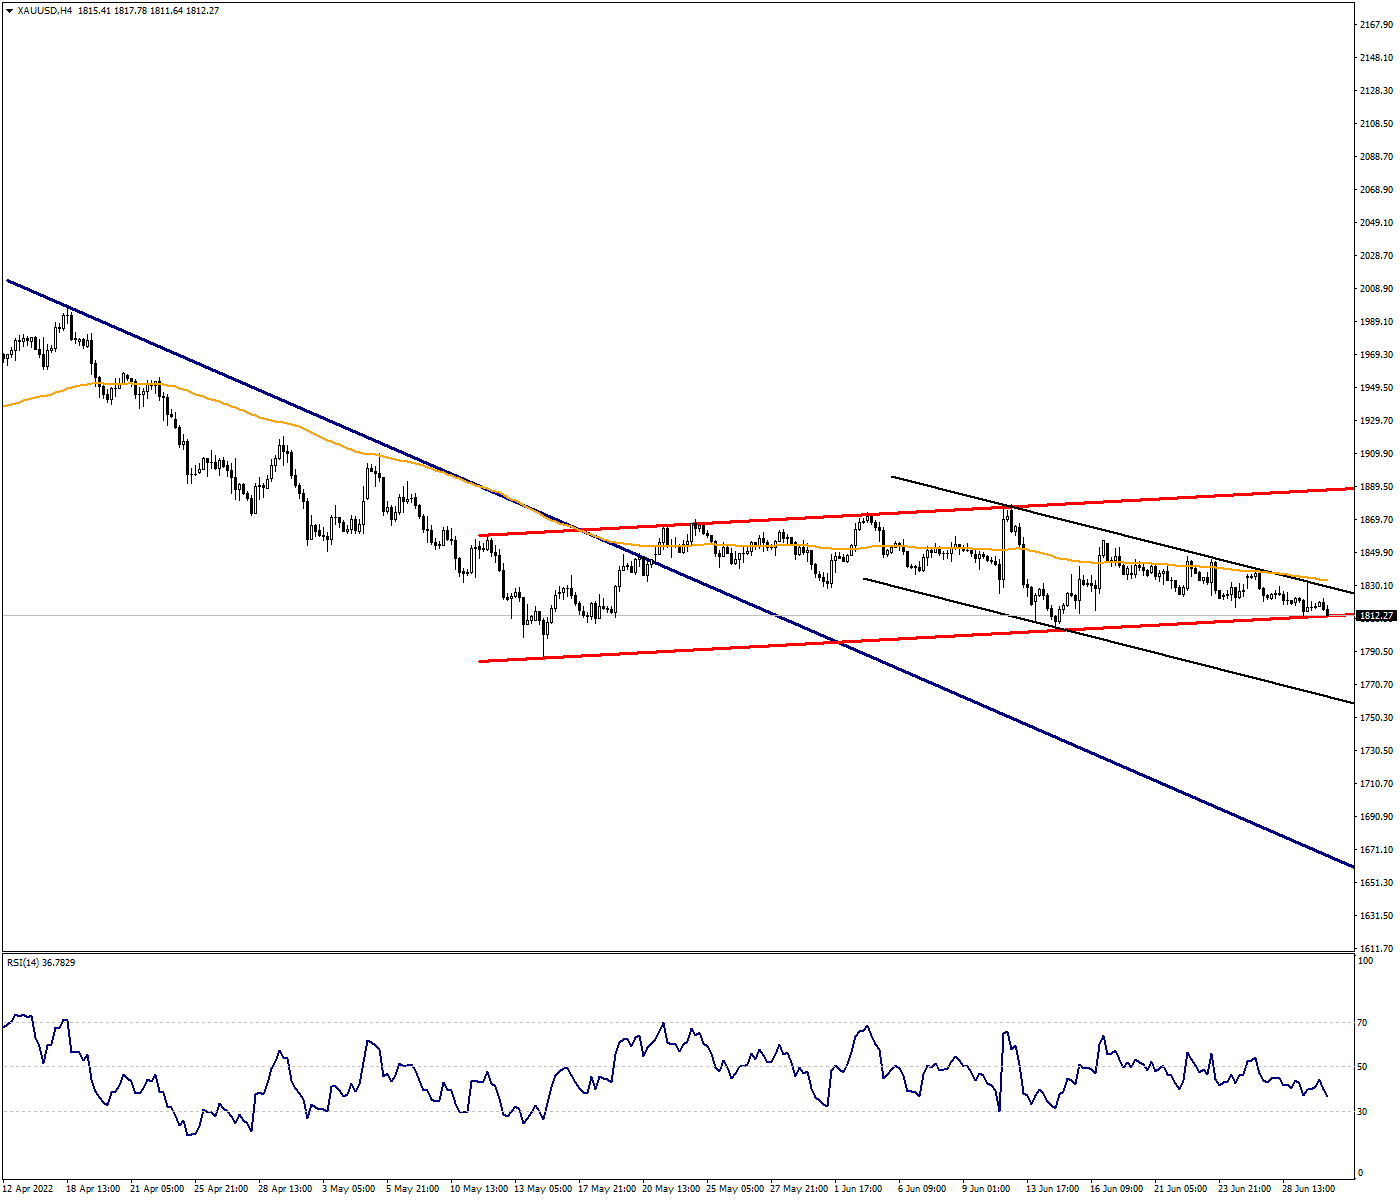 The 1800 Level is Critical on Ounce Gold for the Continuation of Sales Movements